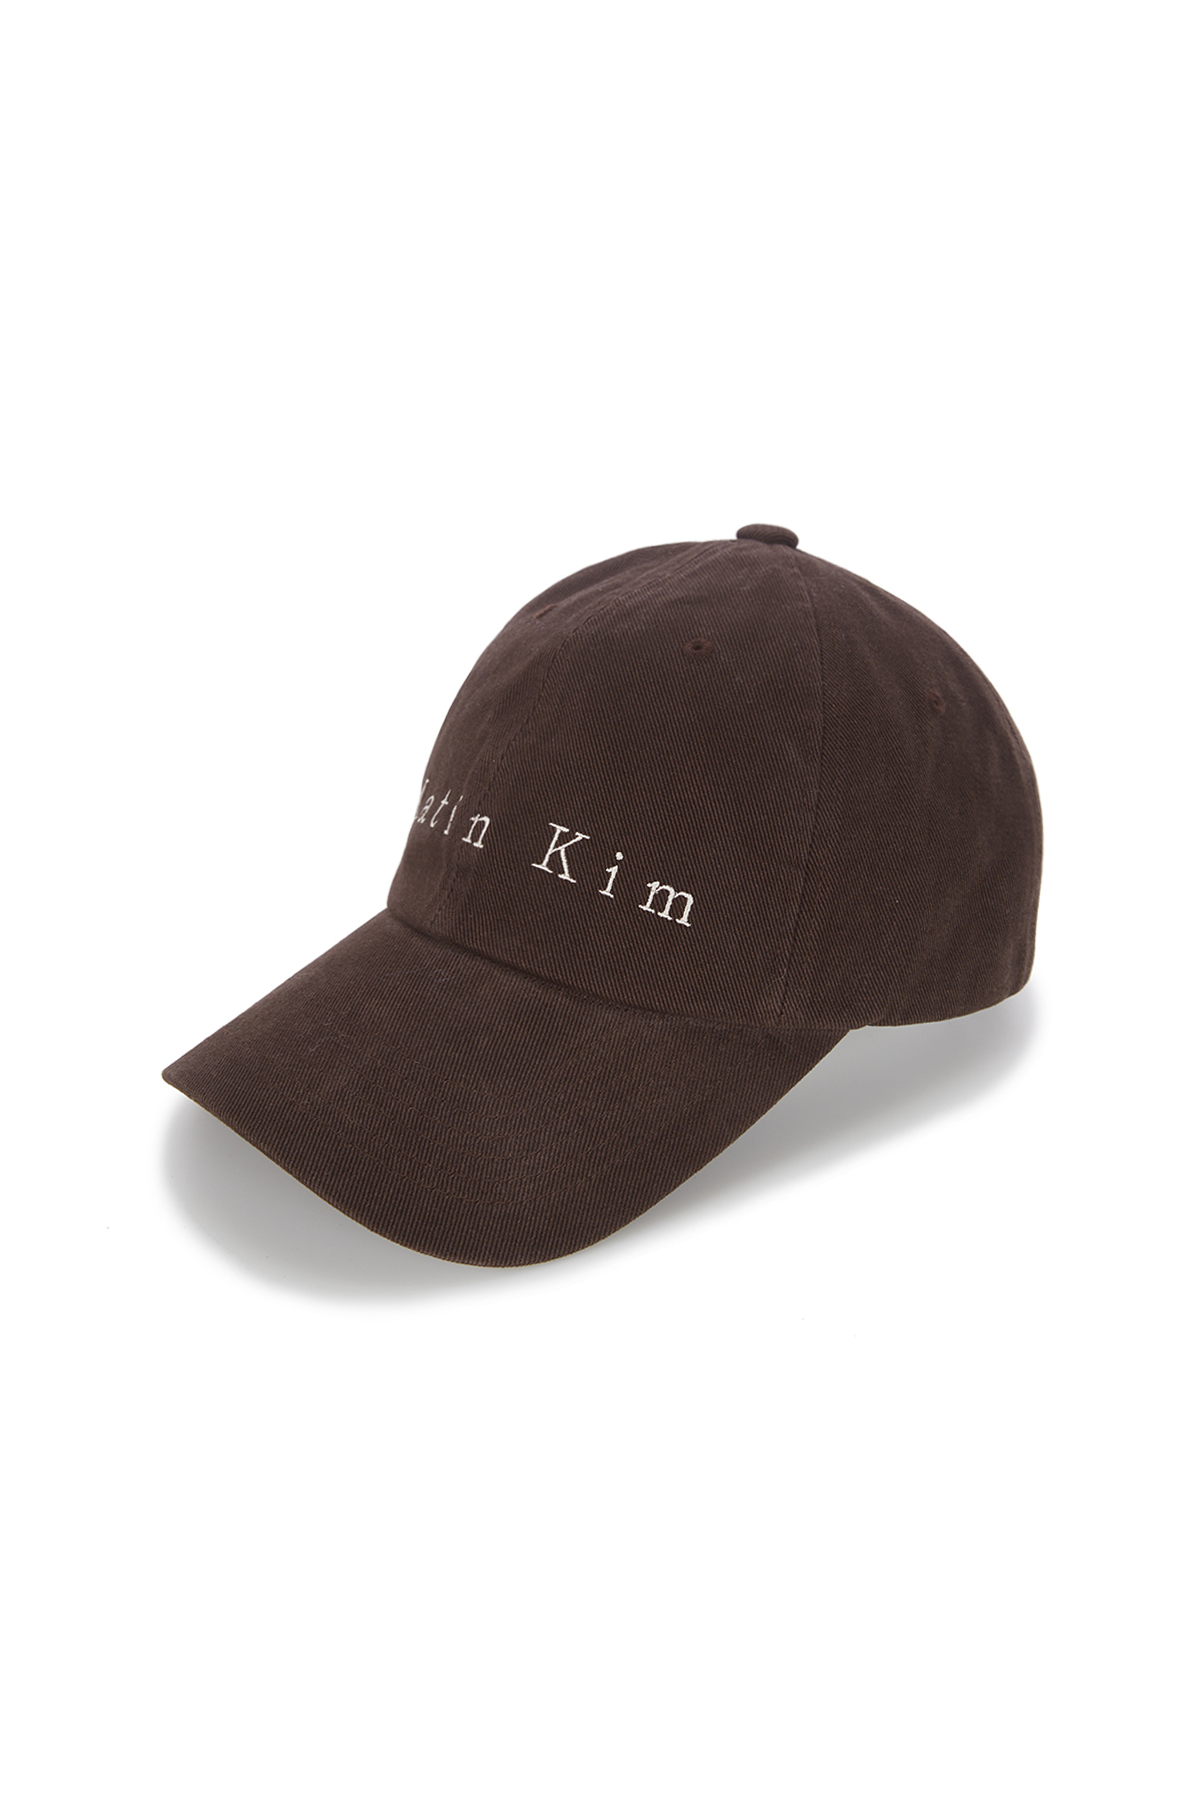 MATIN COTTON WASHED BALL CAP IN BROWN